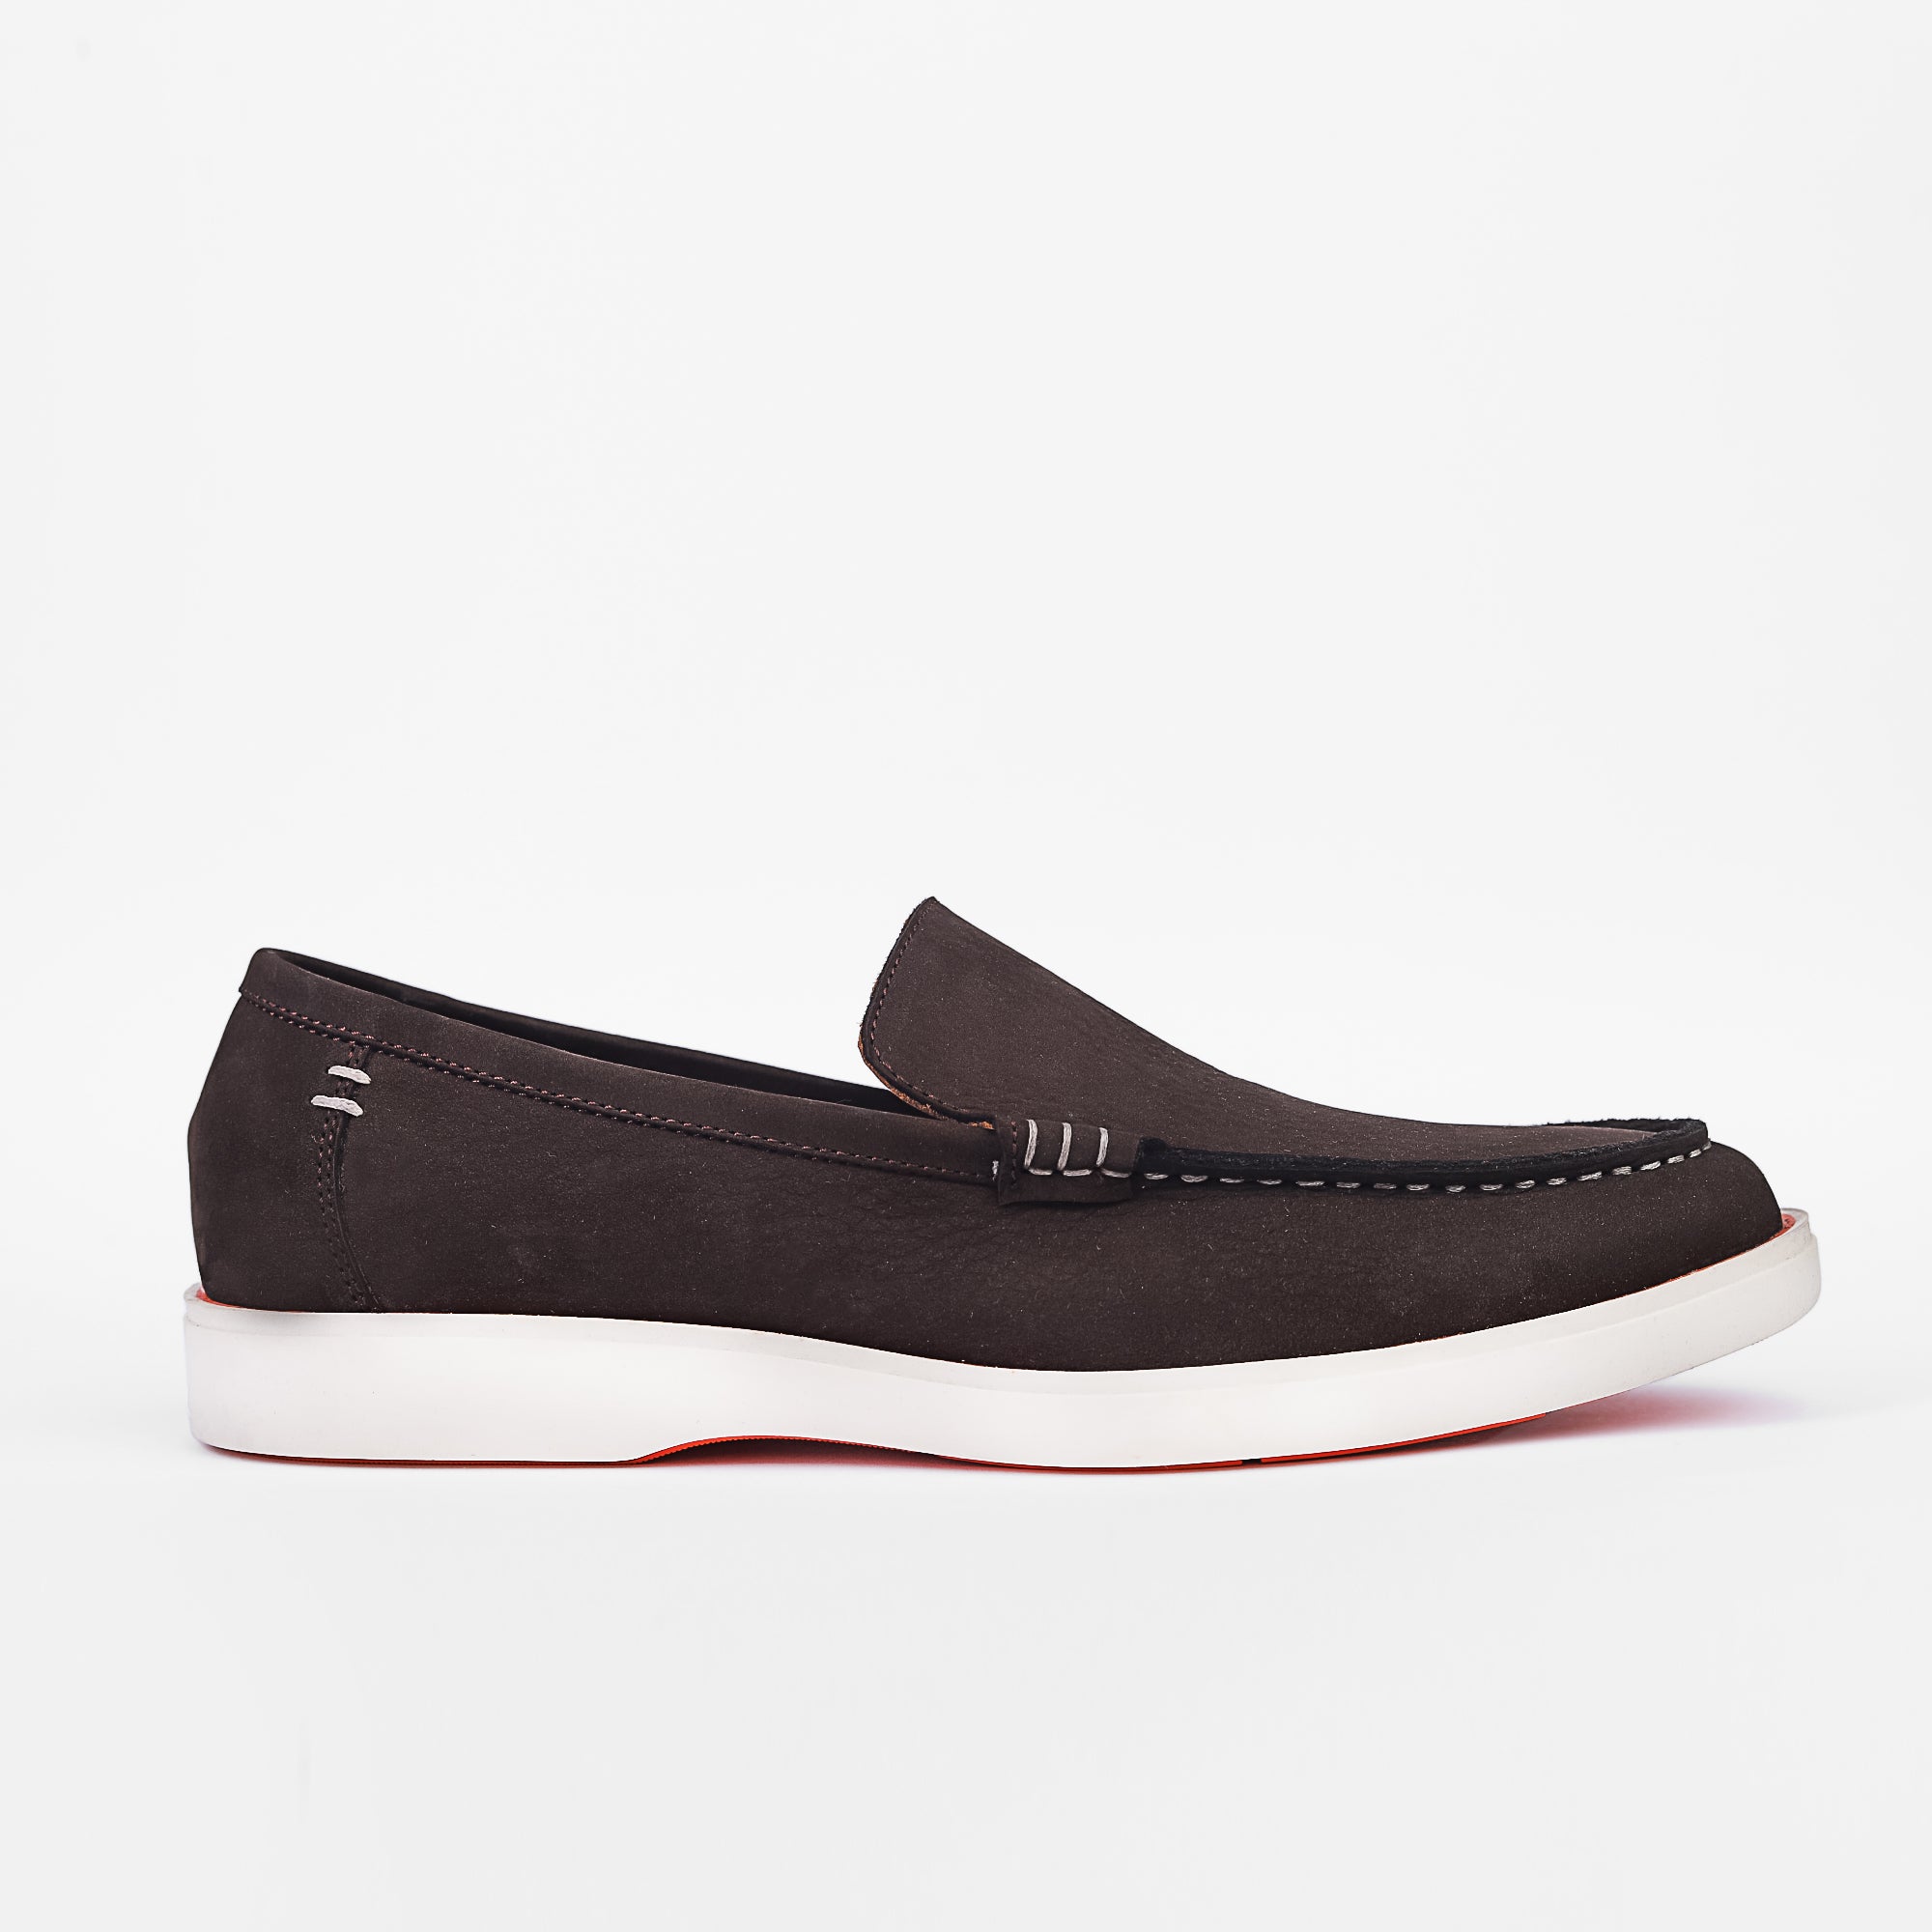 Heritage Suede Flat Loafers For Men Brown